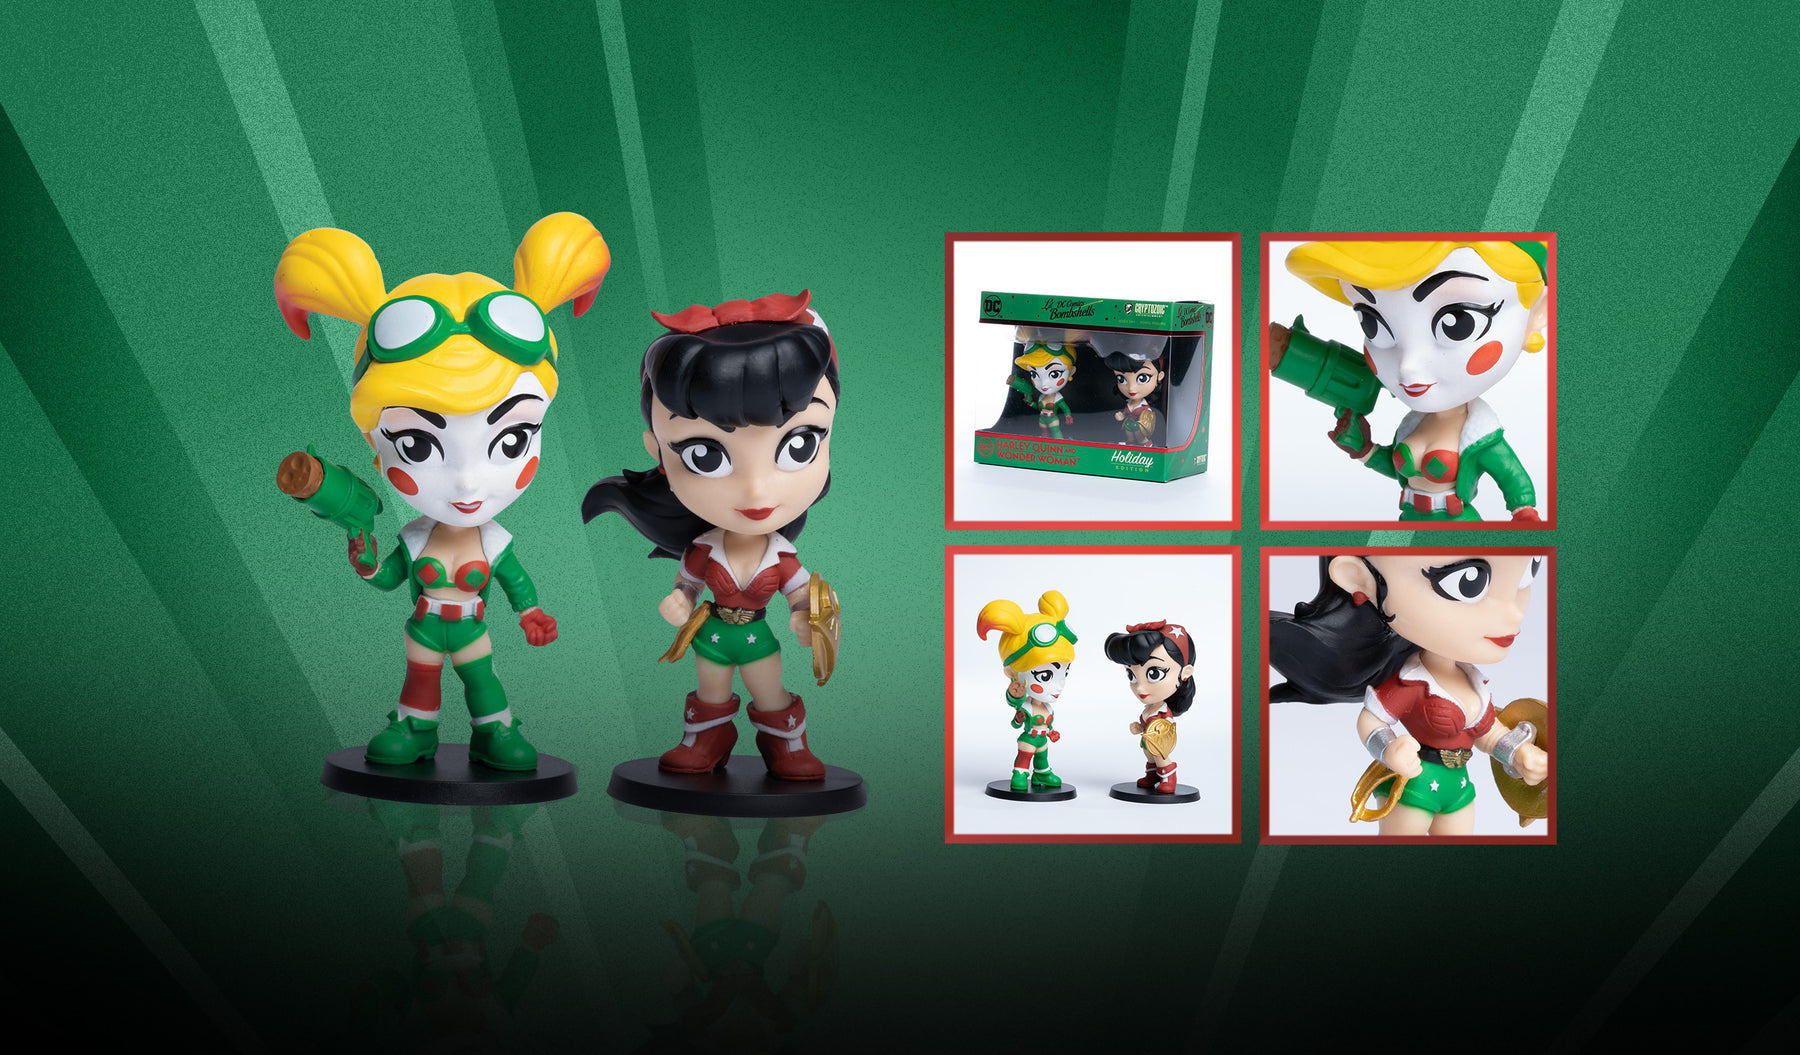 HARLEY QUINN AND WONDER WOMAN HOLIDAY EDITION DC LIL BOMBSHELLS VINYL FIGURES (CRYPTOZOIC STORE EXCLUSIVE)